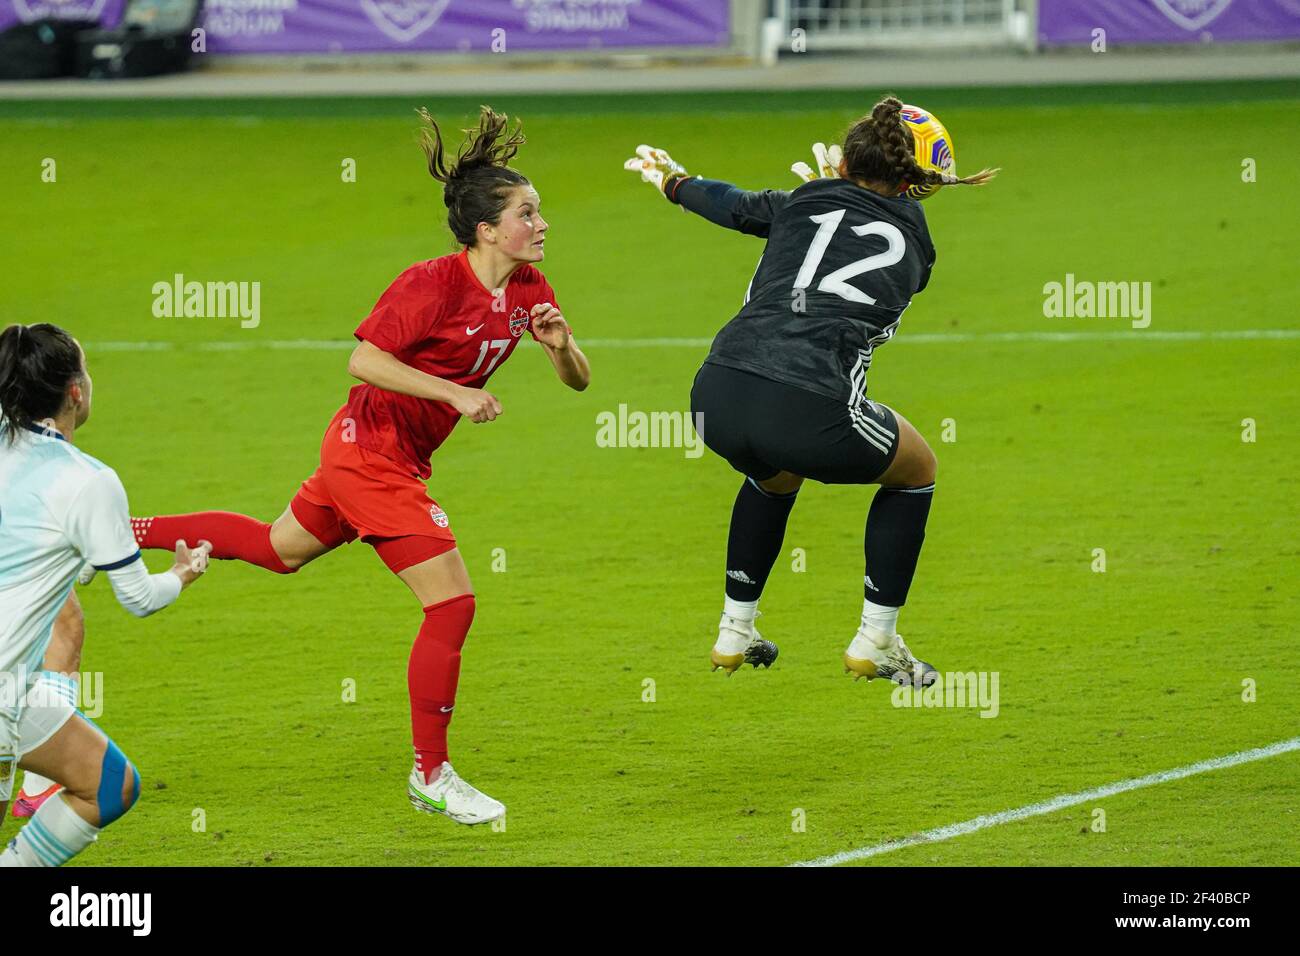 Orlando, Florida, USA, February 21, 2021, Canada's Jessie Fleming makes a header as Argentina's Goalkeeper misses during the SheBelieves Cup at Exploria Stadium  (Photo Credit:  Marty Jean-Louis) Stock Photo